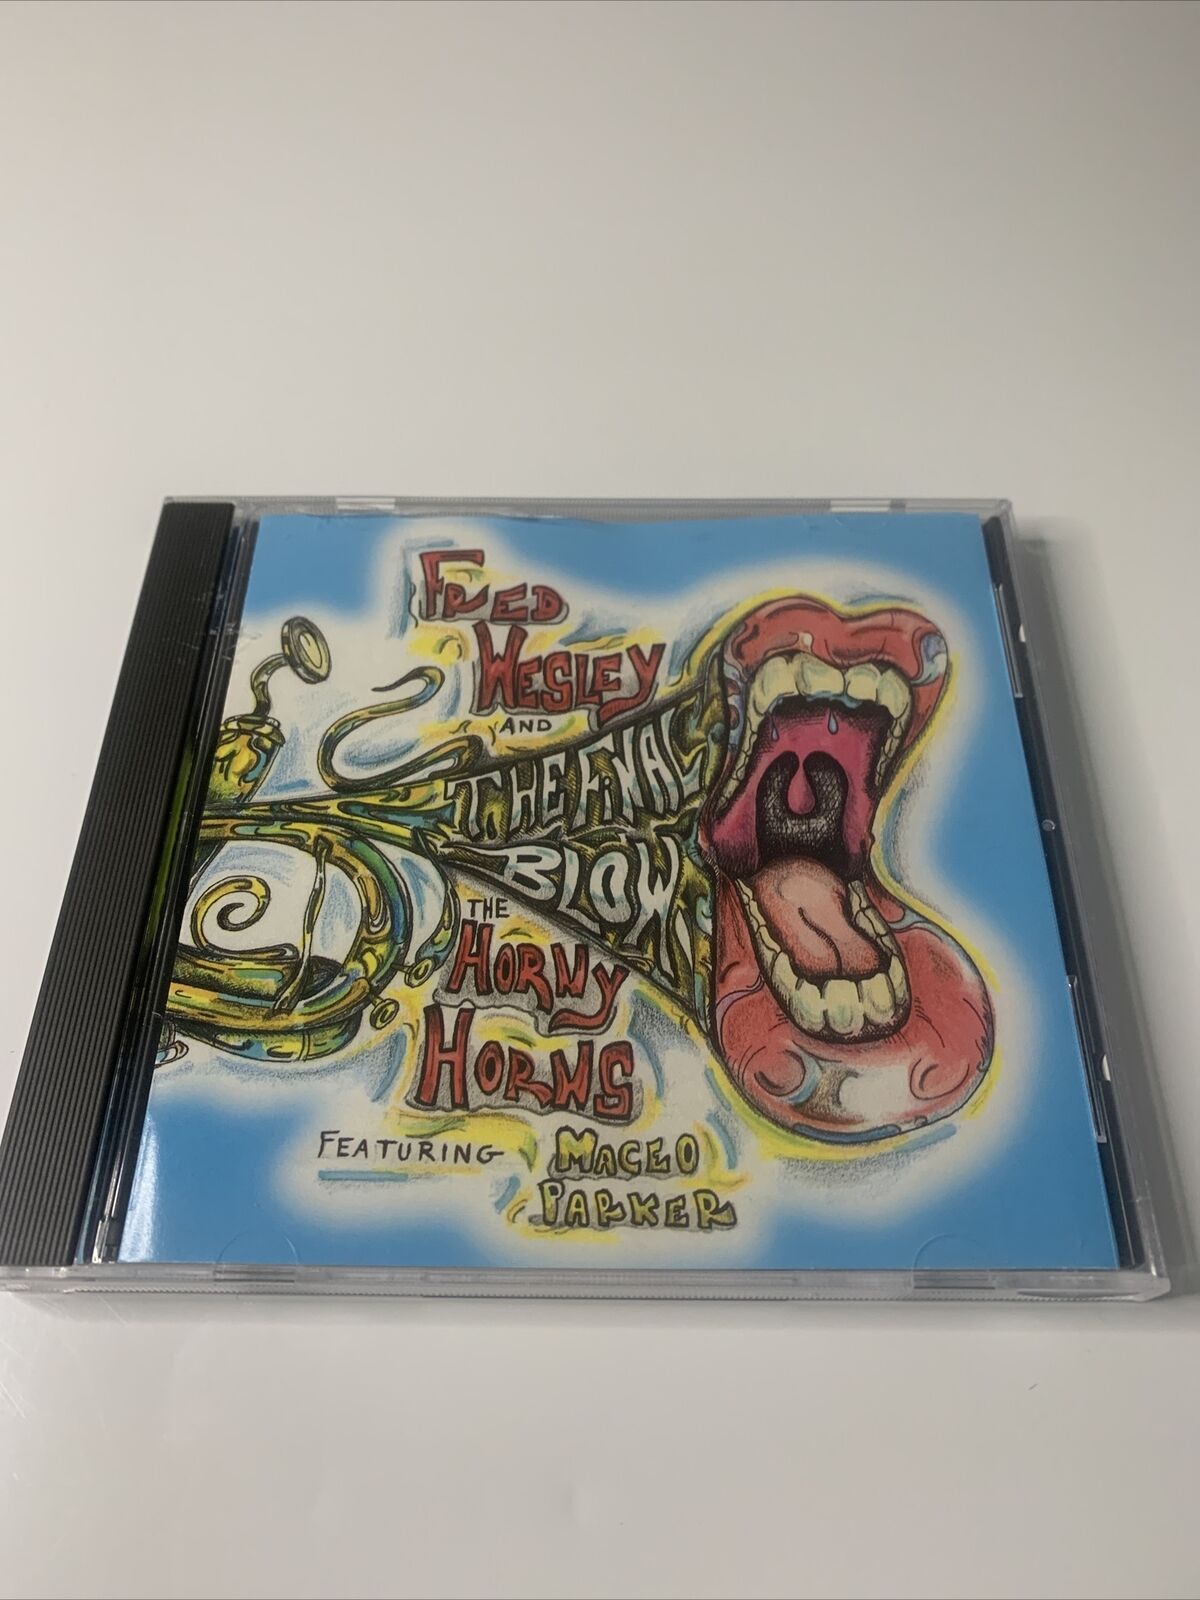 1994 Fred Wesley The Final Blow Maceo Parker Horny Horns CD  AEM 0750742587122